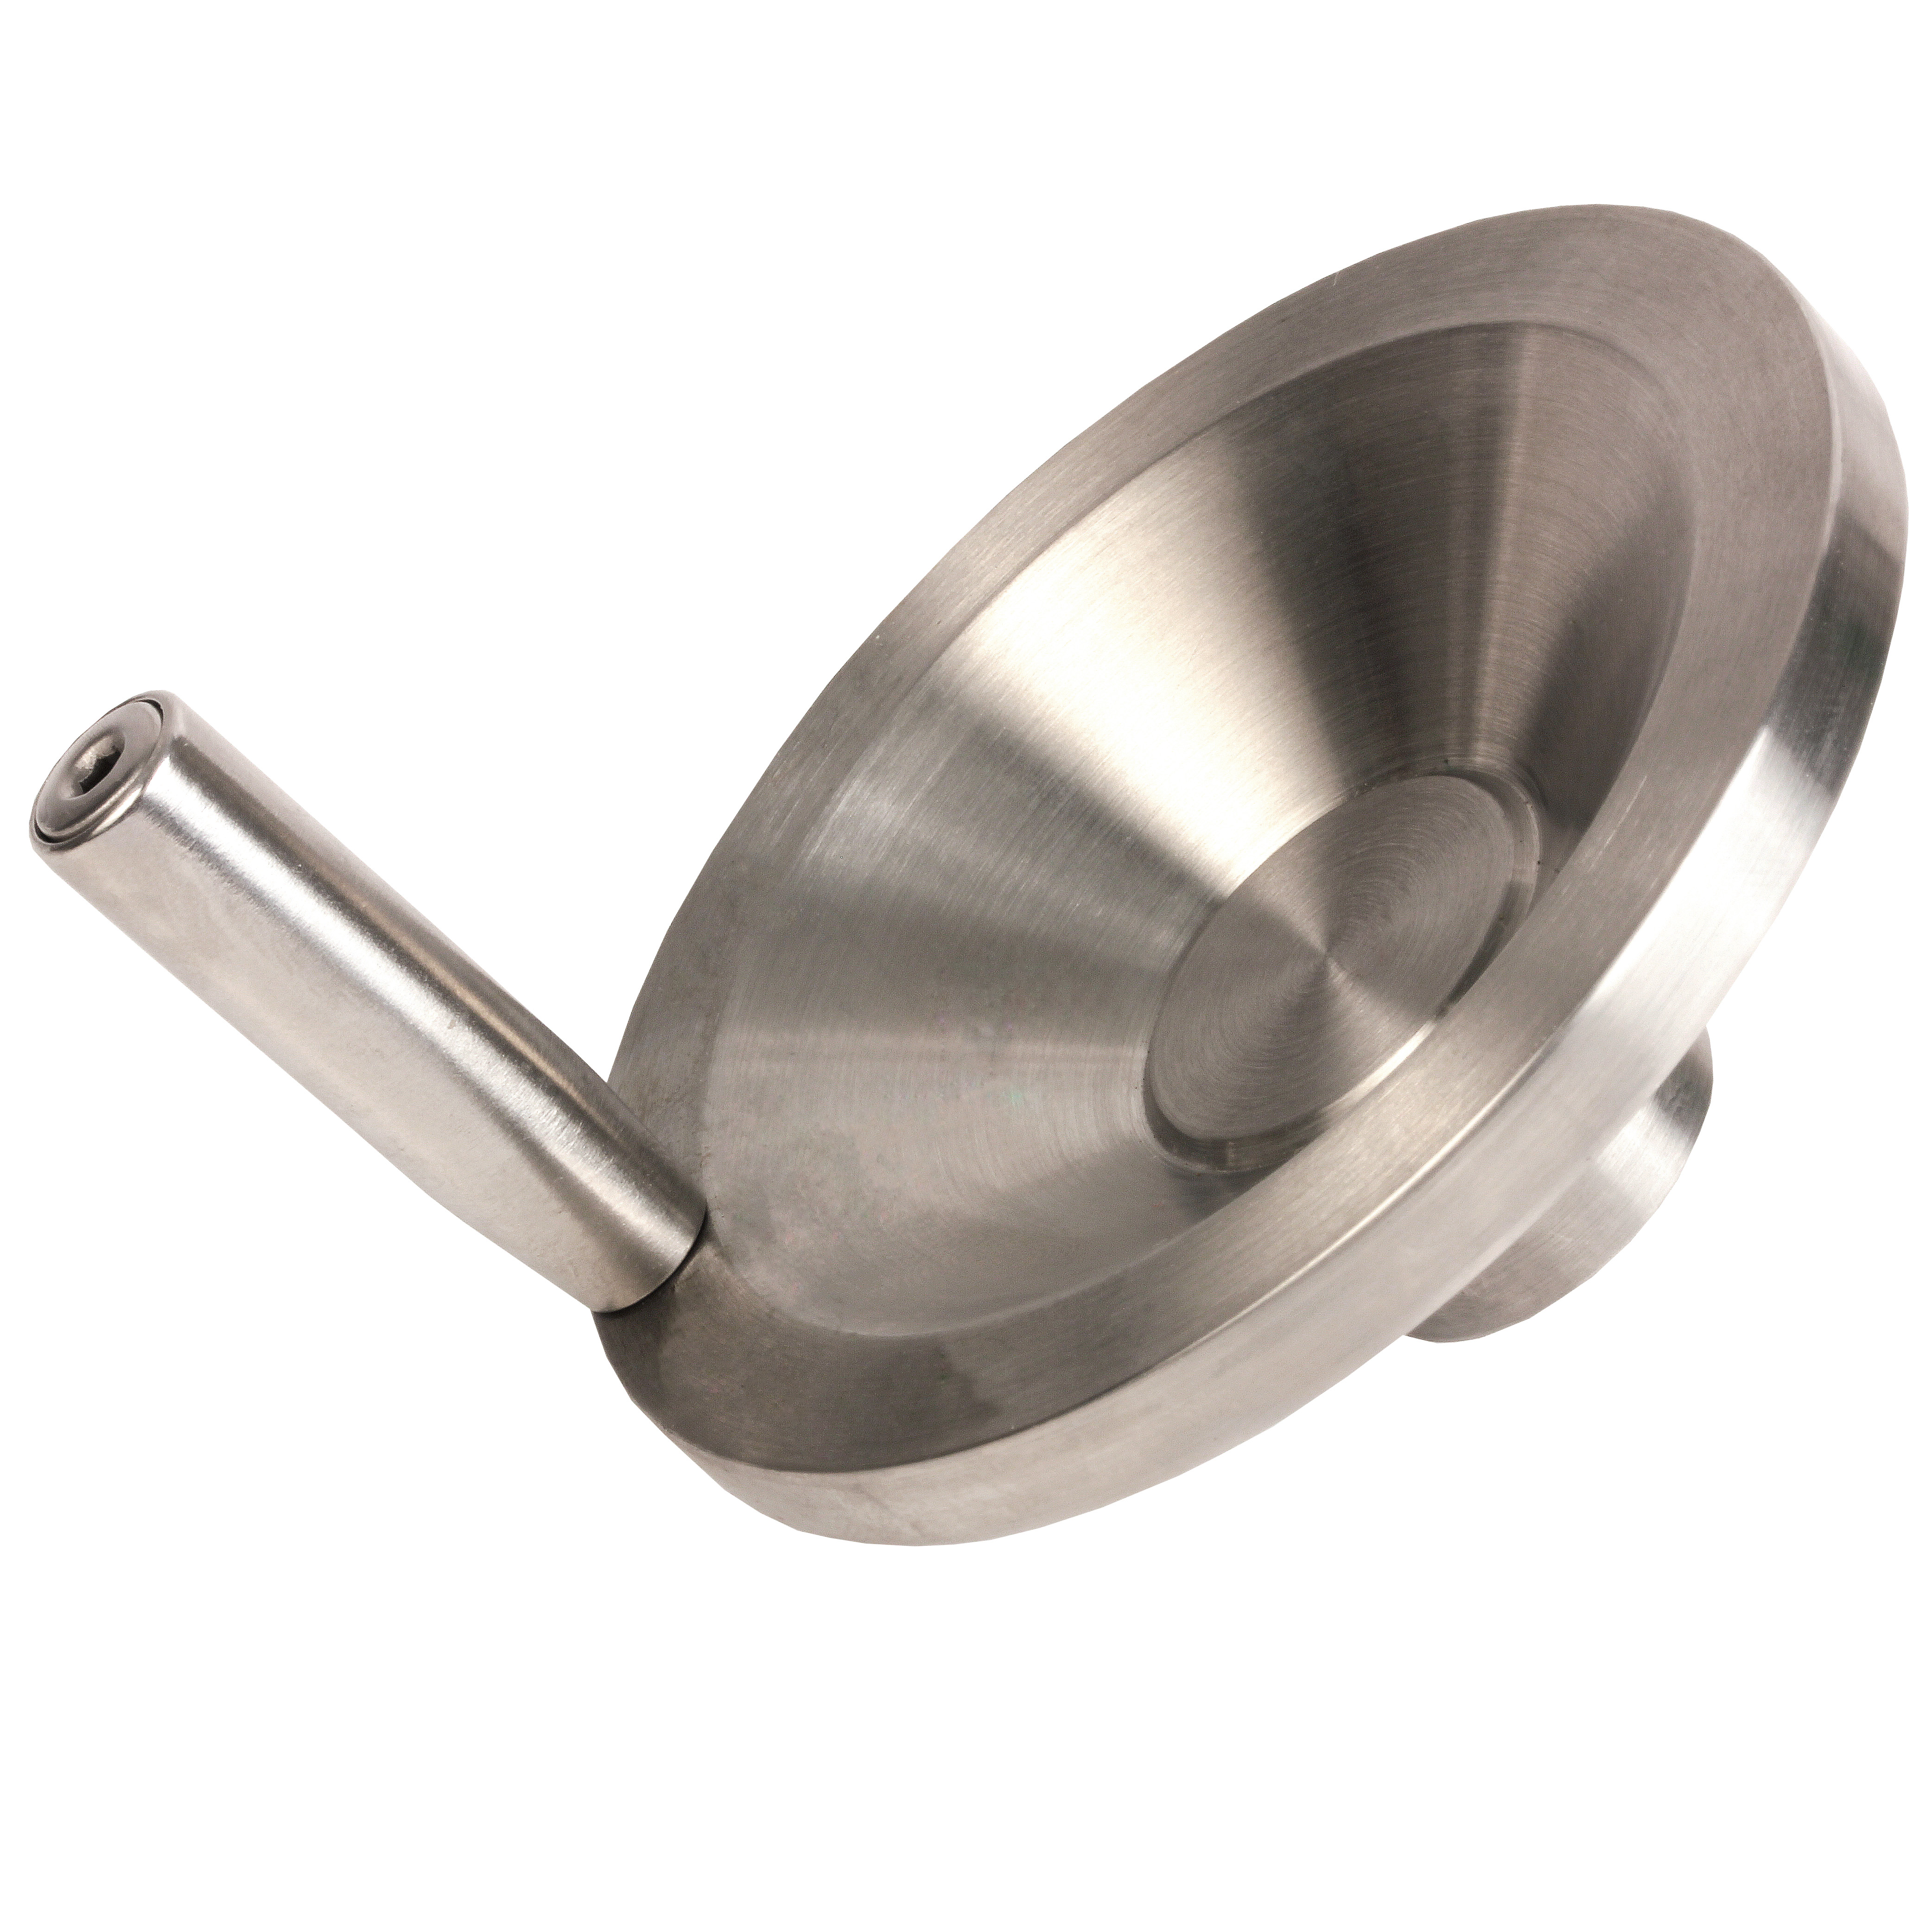 Stainless steel handwheel with handle - Stainless steel 304 - Filled - Revolving handle